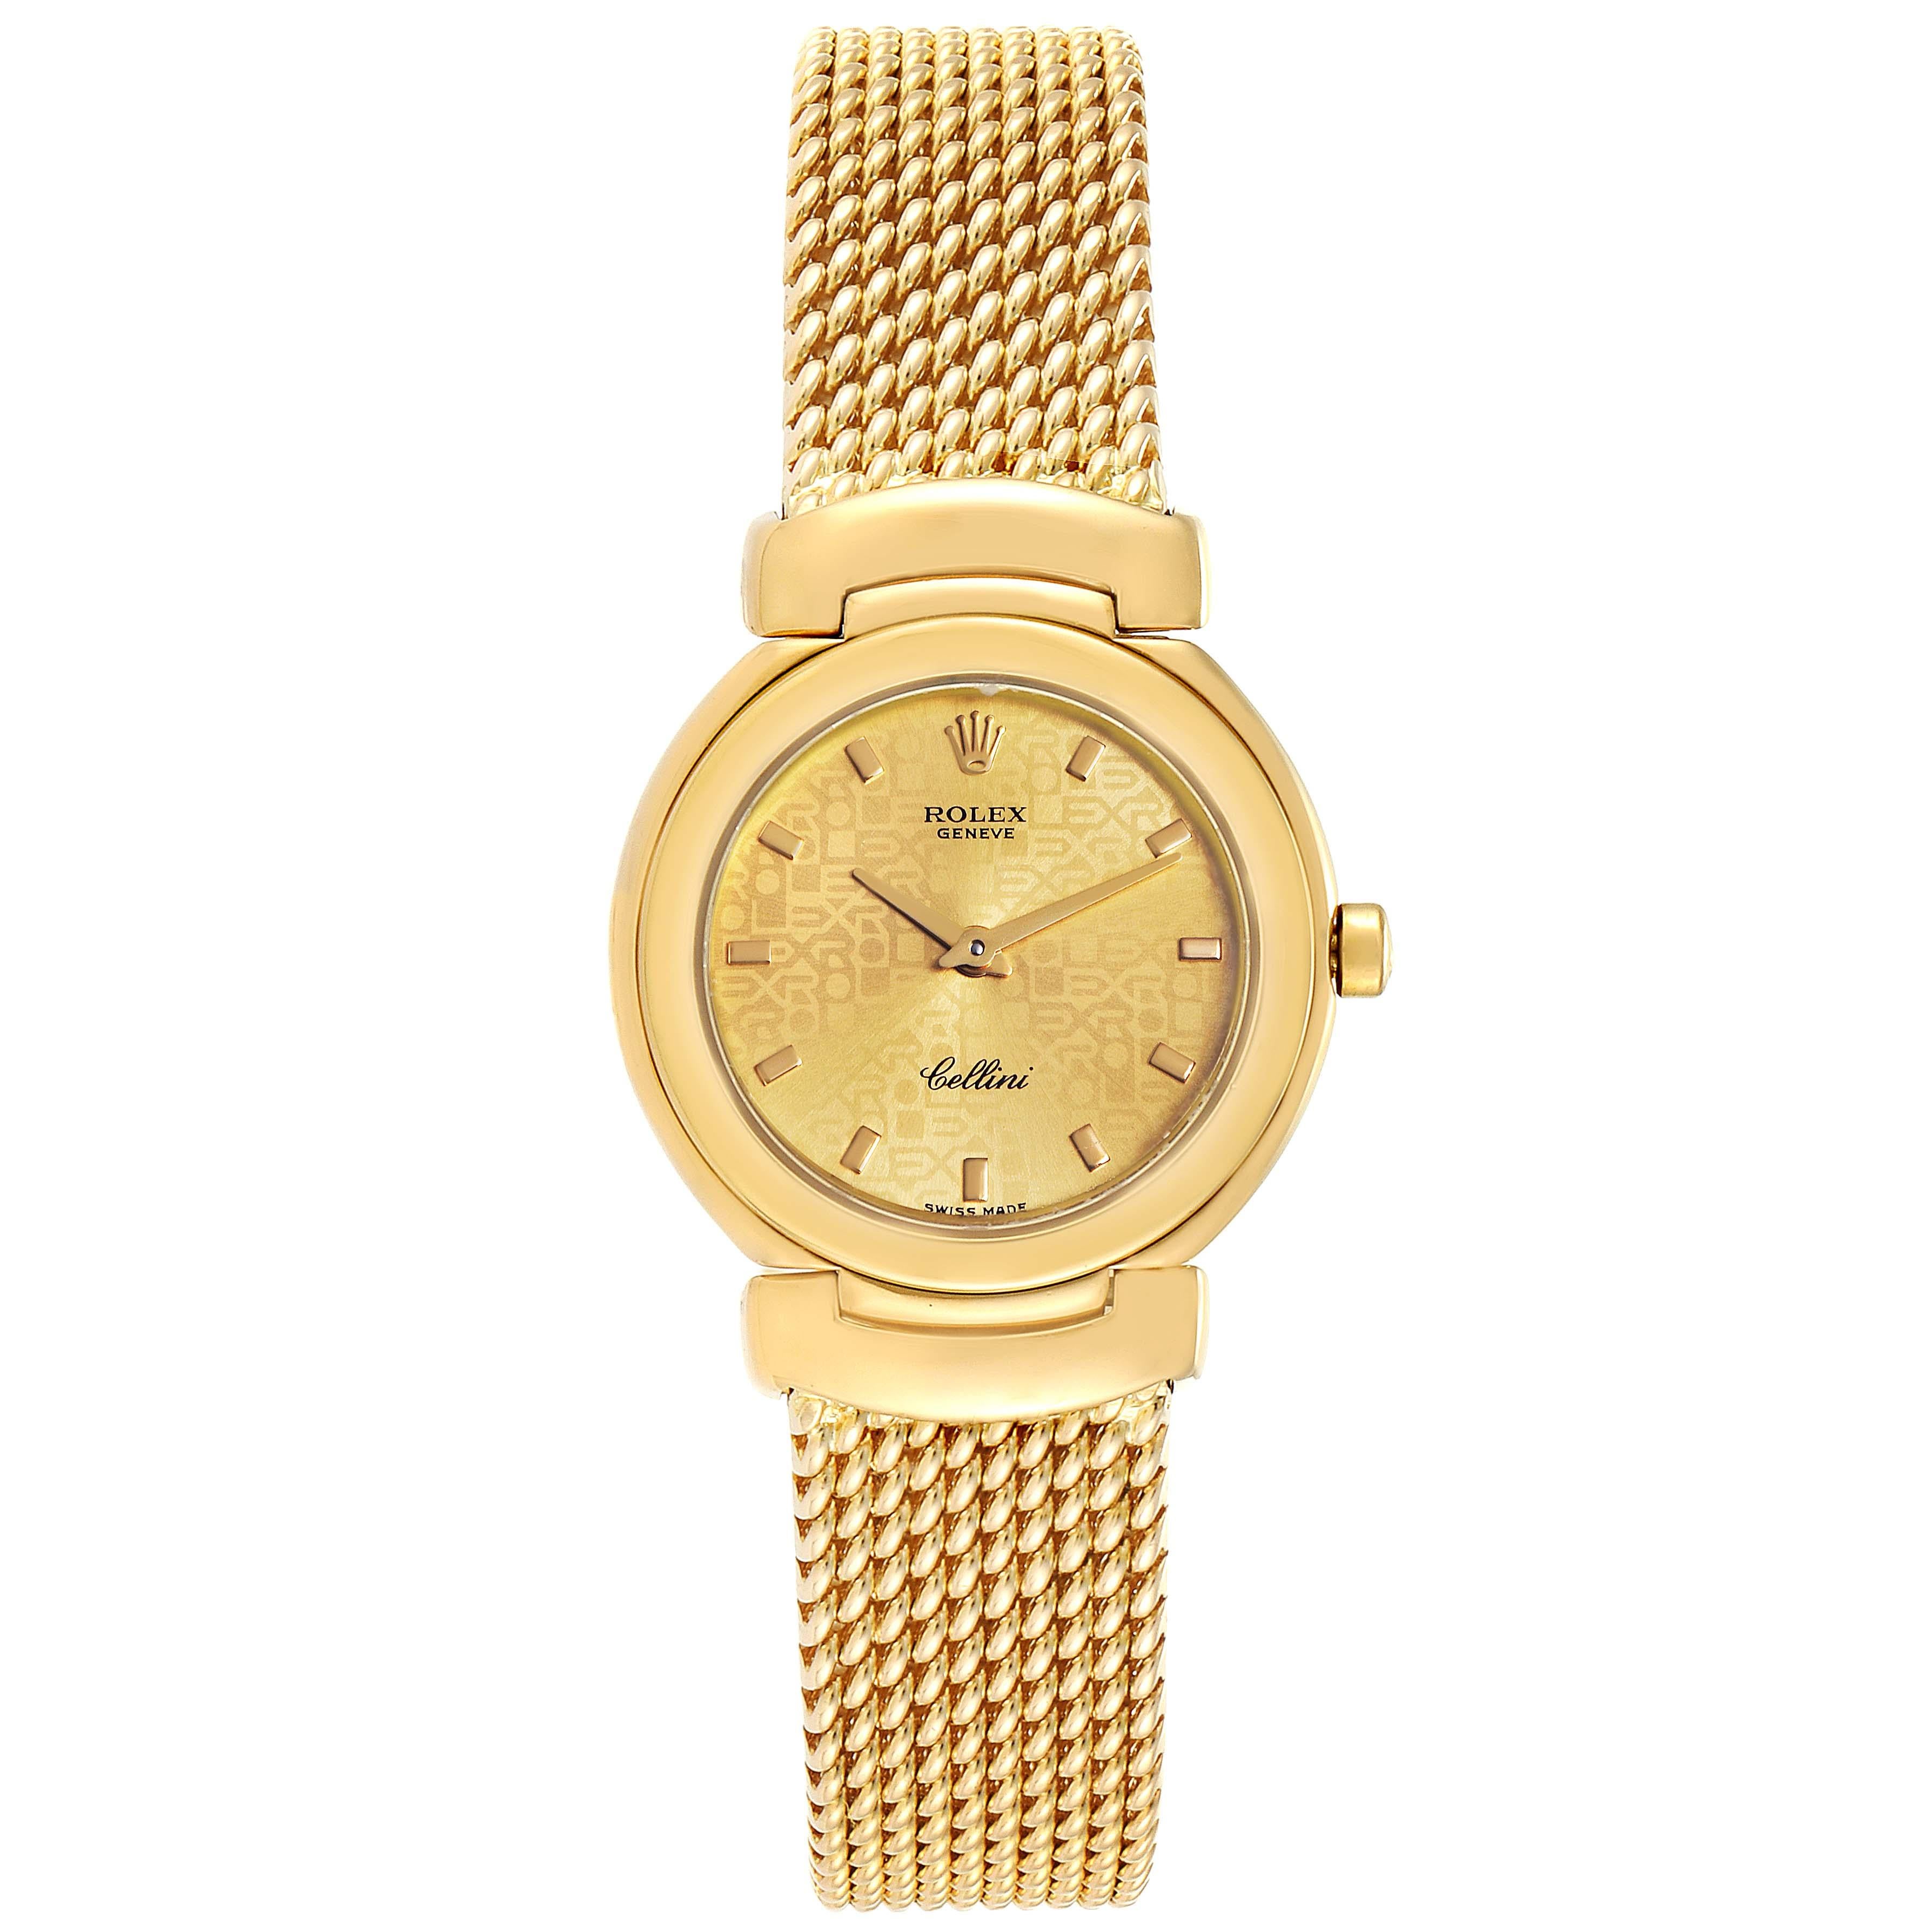 Rolex Cellini Yellow Gold Mesh Bracelet Ladies Watch 6621 Box Papers. Quartz movement. 18k yellow gold case 26.0 mm. Rolex logo on a crown. . Scratch resistant sapphire crystal. Champagne jubilee anniversary dial with raised gold baton hour markers.